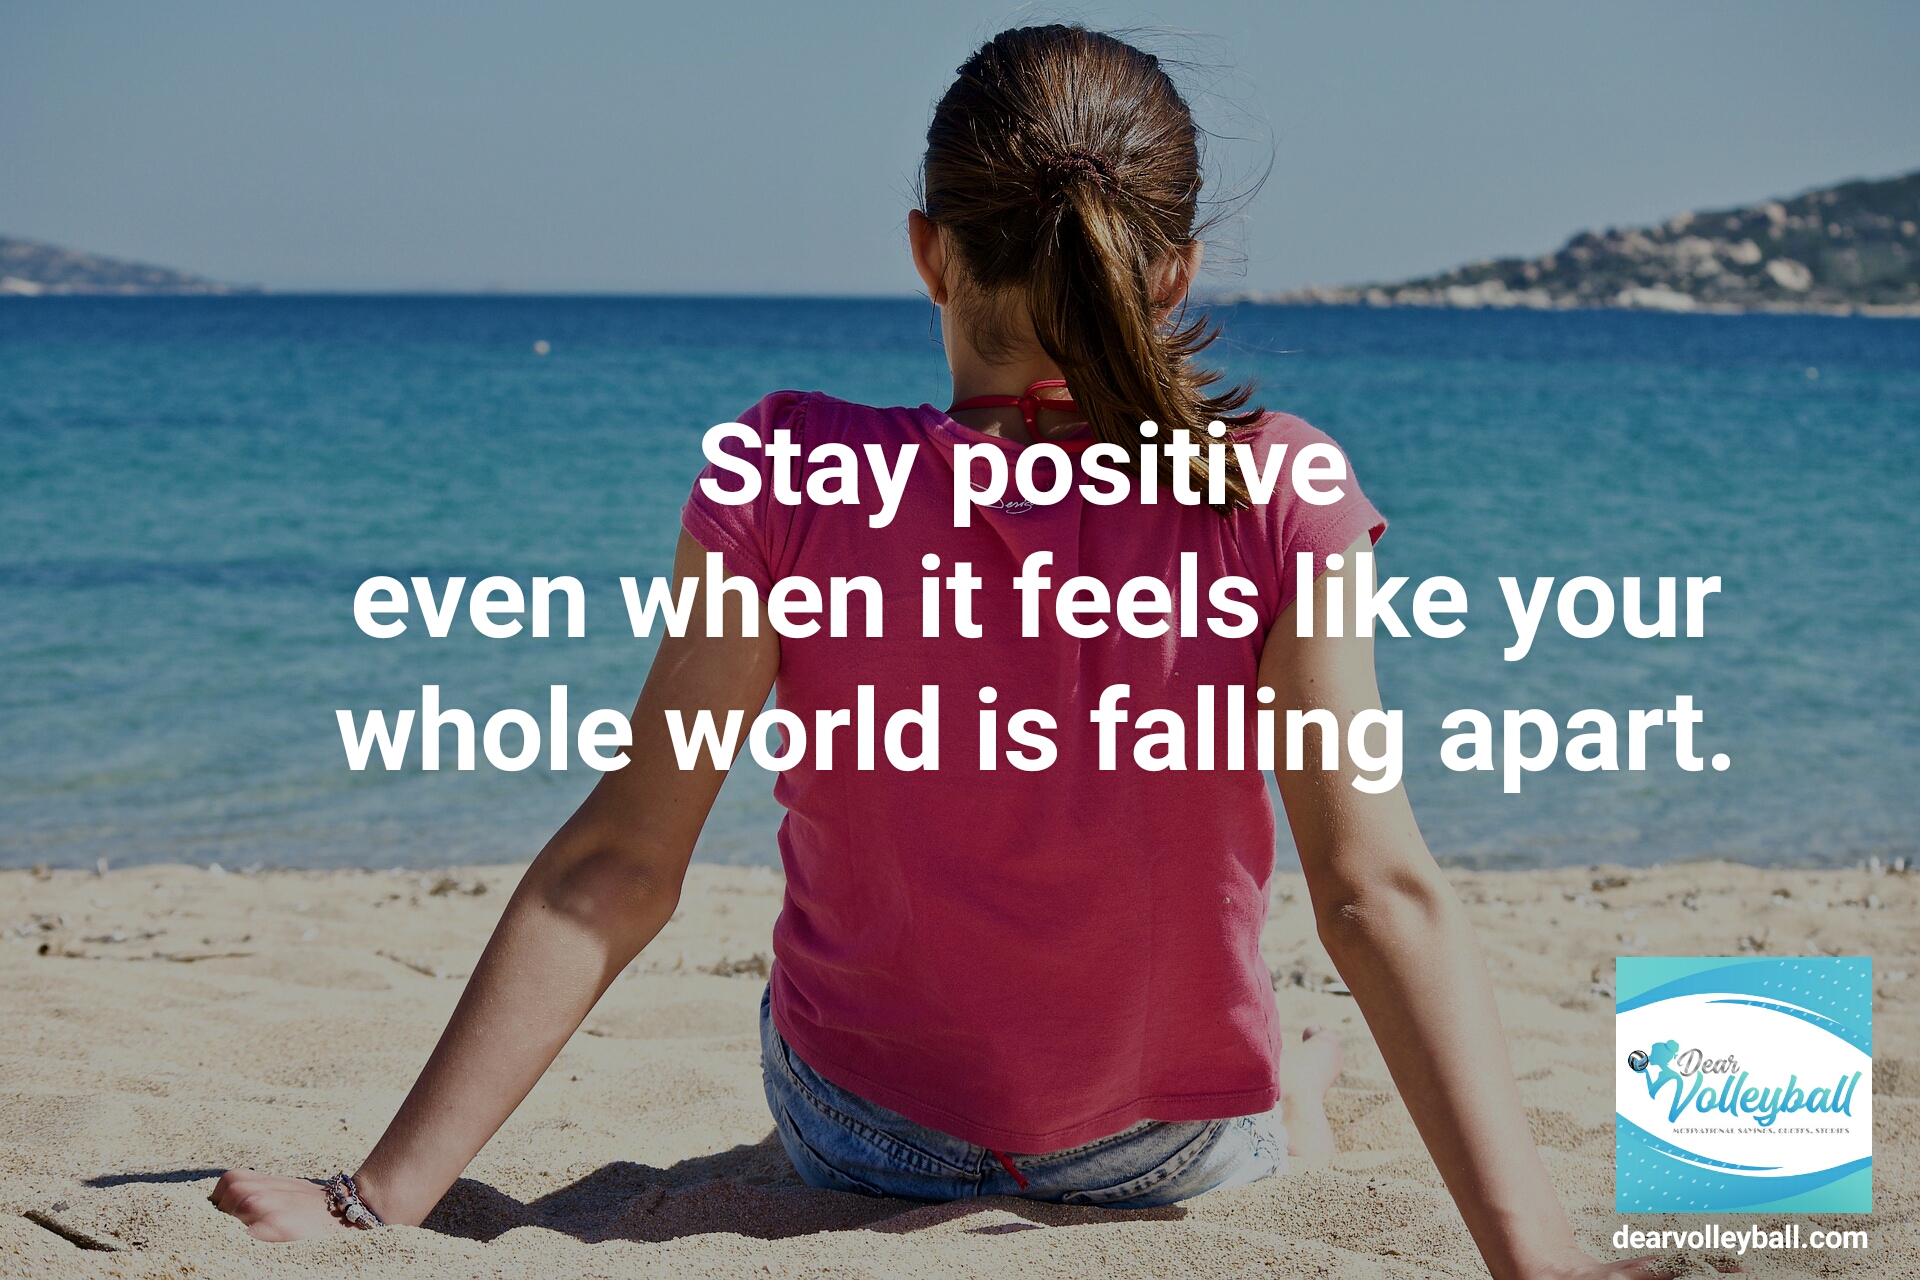 "Stay positive even when it feels like your whole world is falling apart." and other strong girls pictures paired with an inspirational volleyball quote on Dear Volleyball.com.